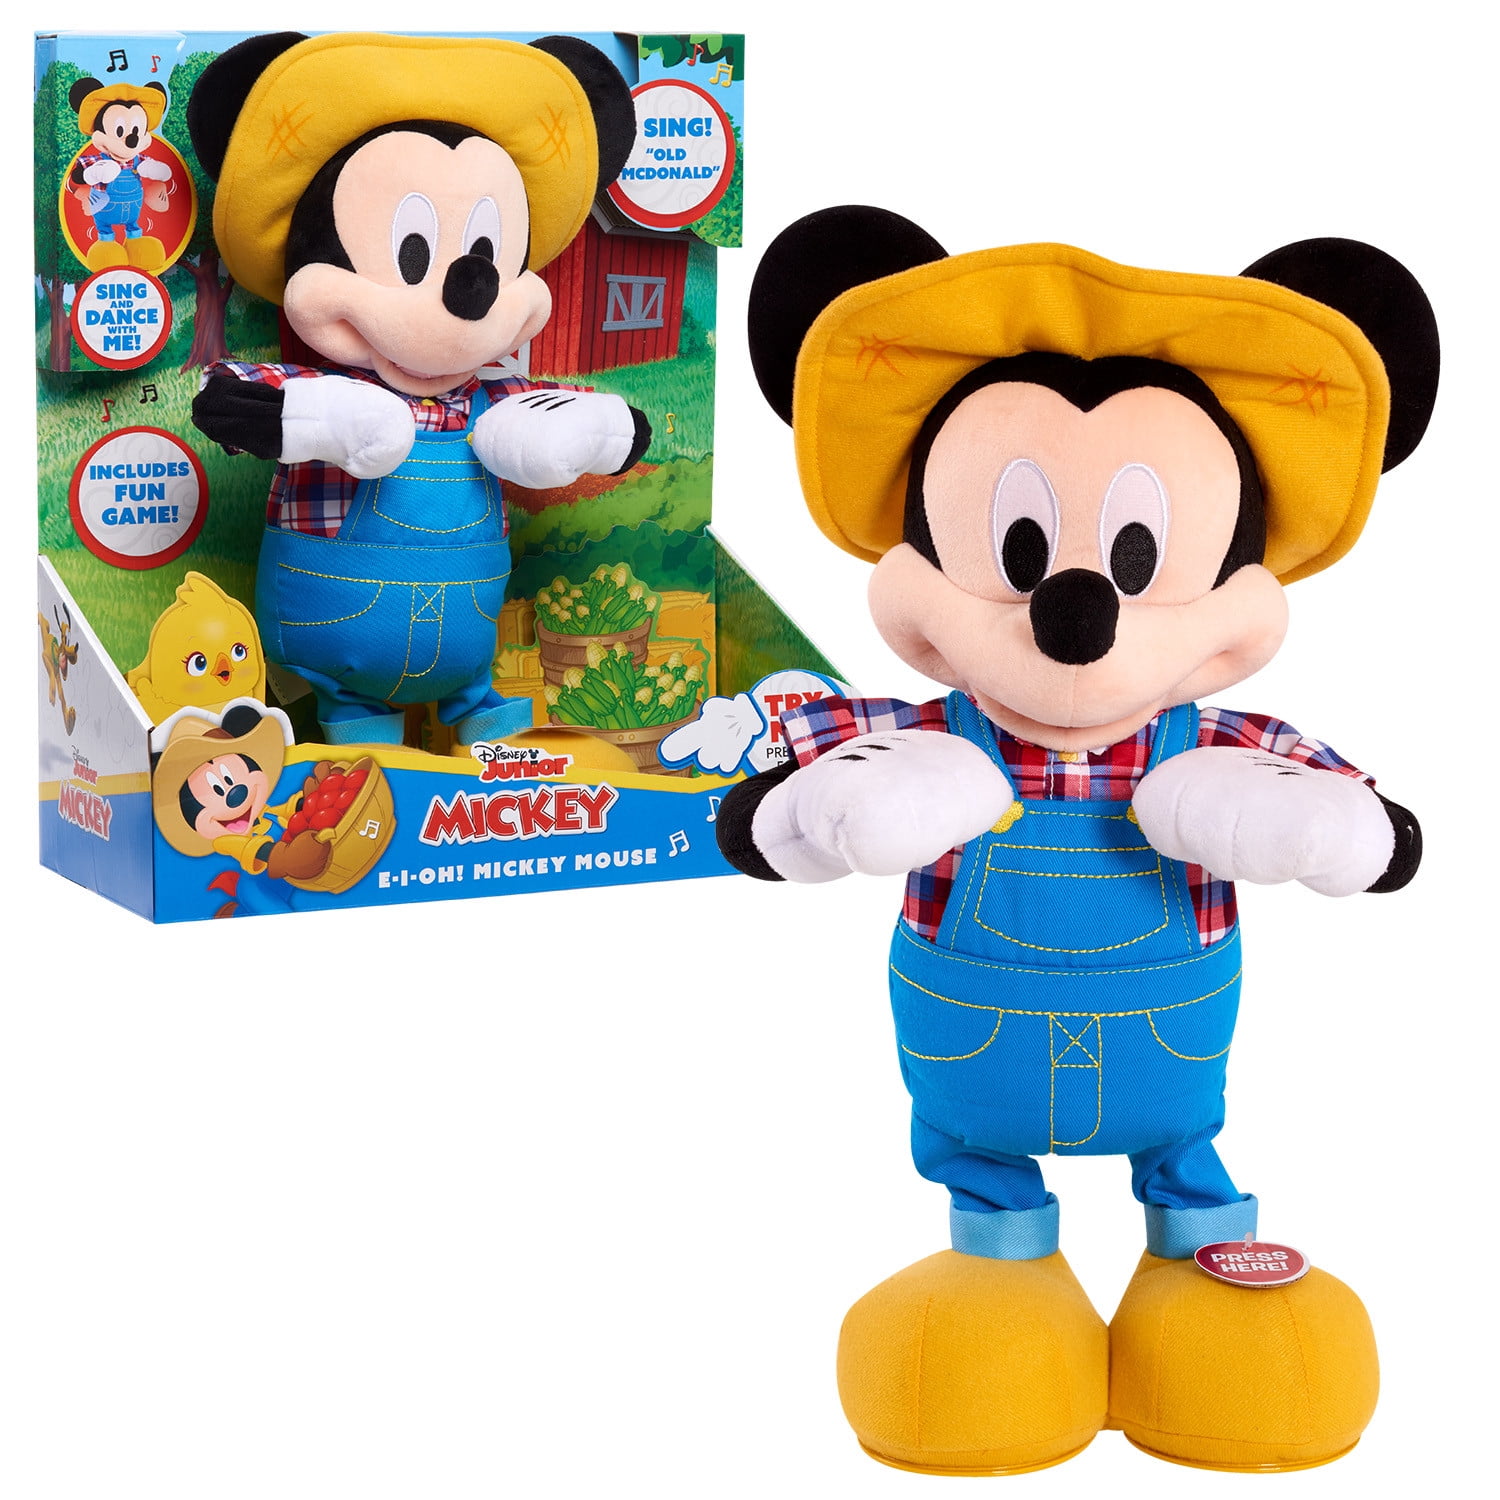 Fisher Disney Rock Star Mickey Mouse Plush Interactive Sings Age 2 for sale online 